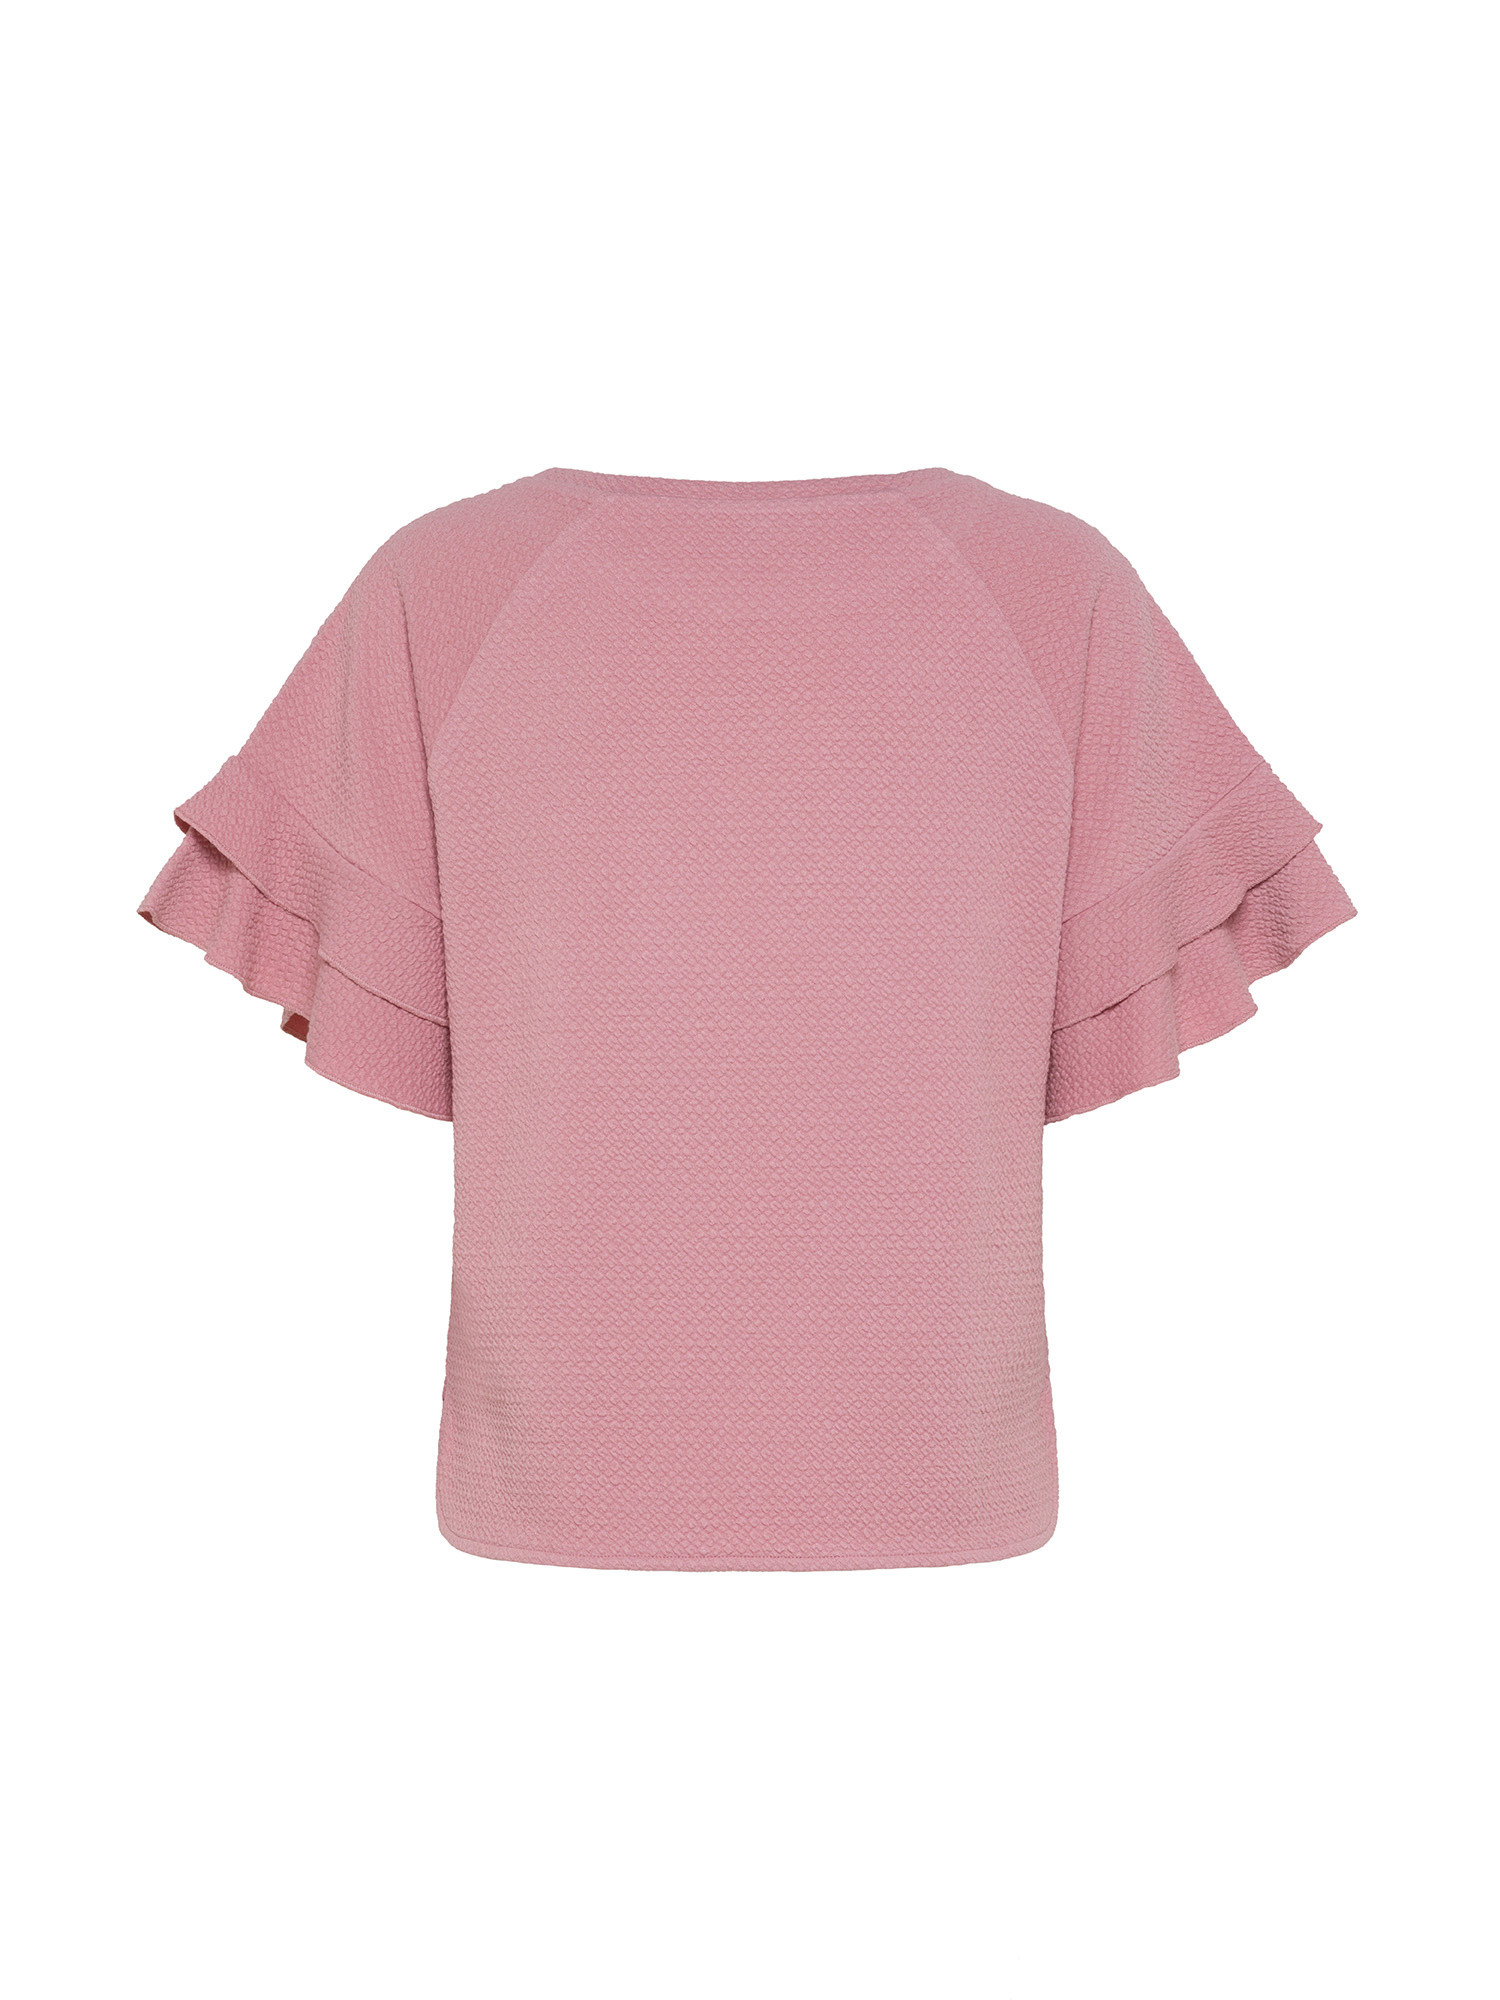 Koan - T-shirt con rouches, Rosa, large image number 1